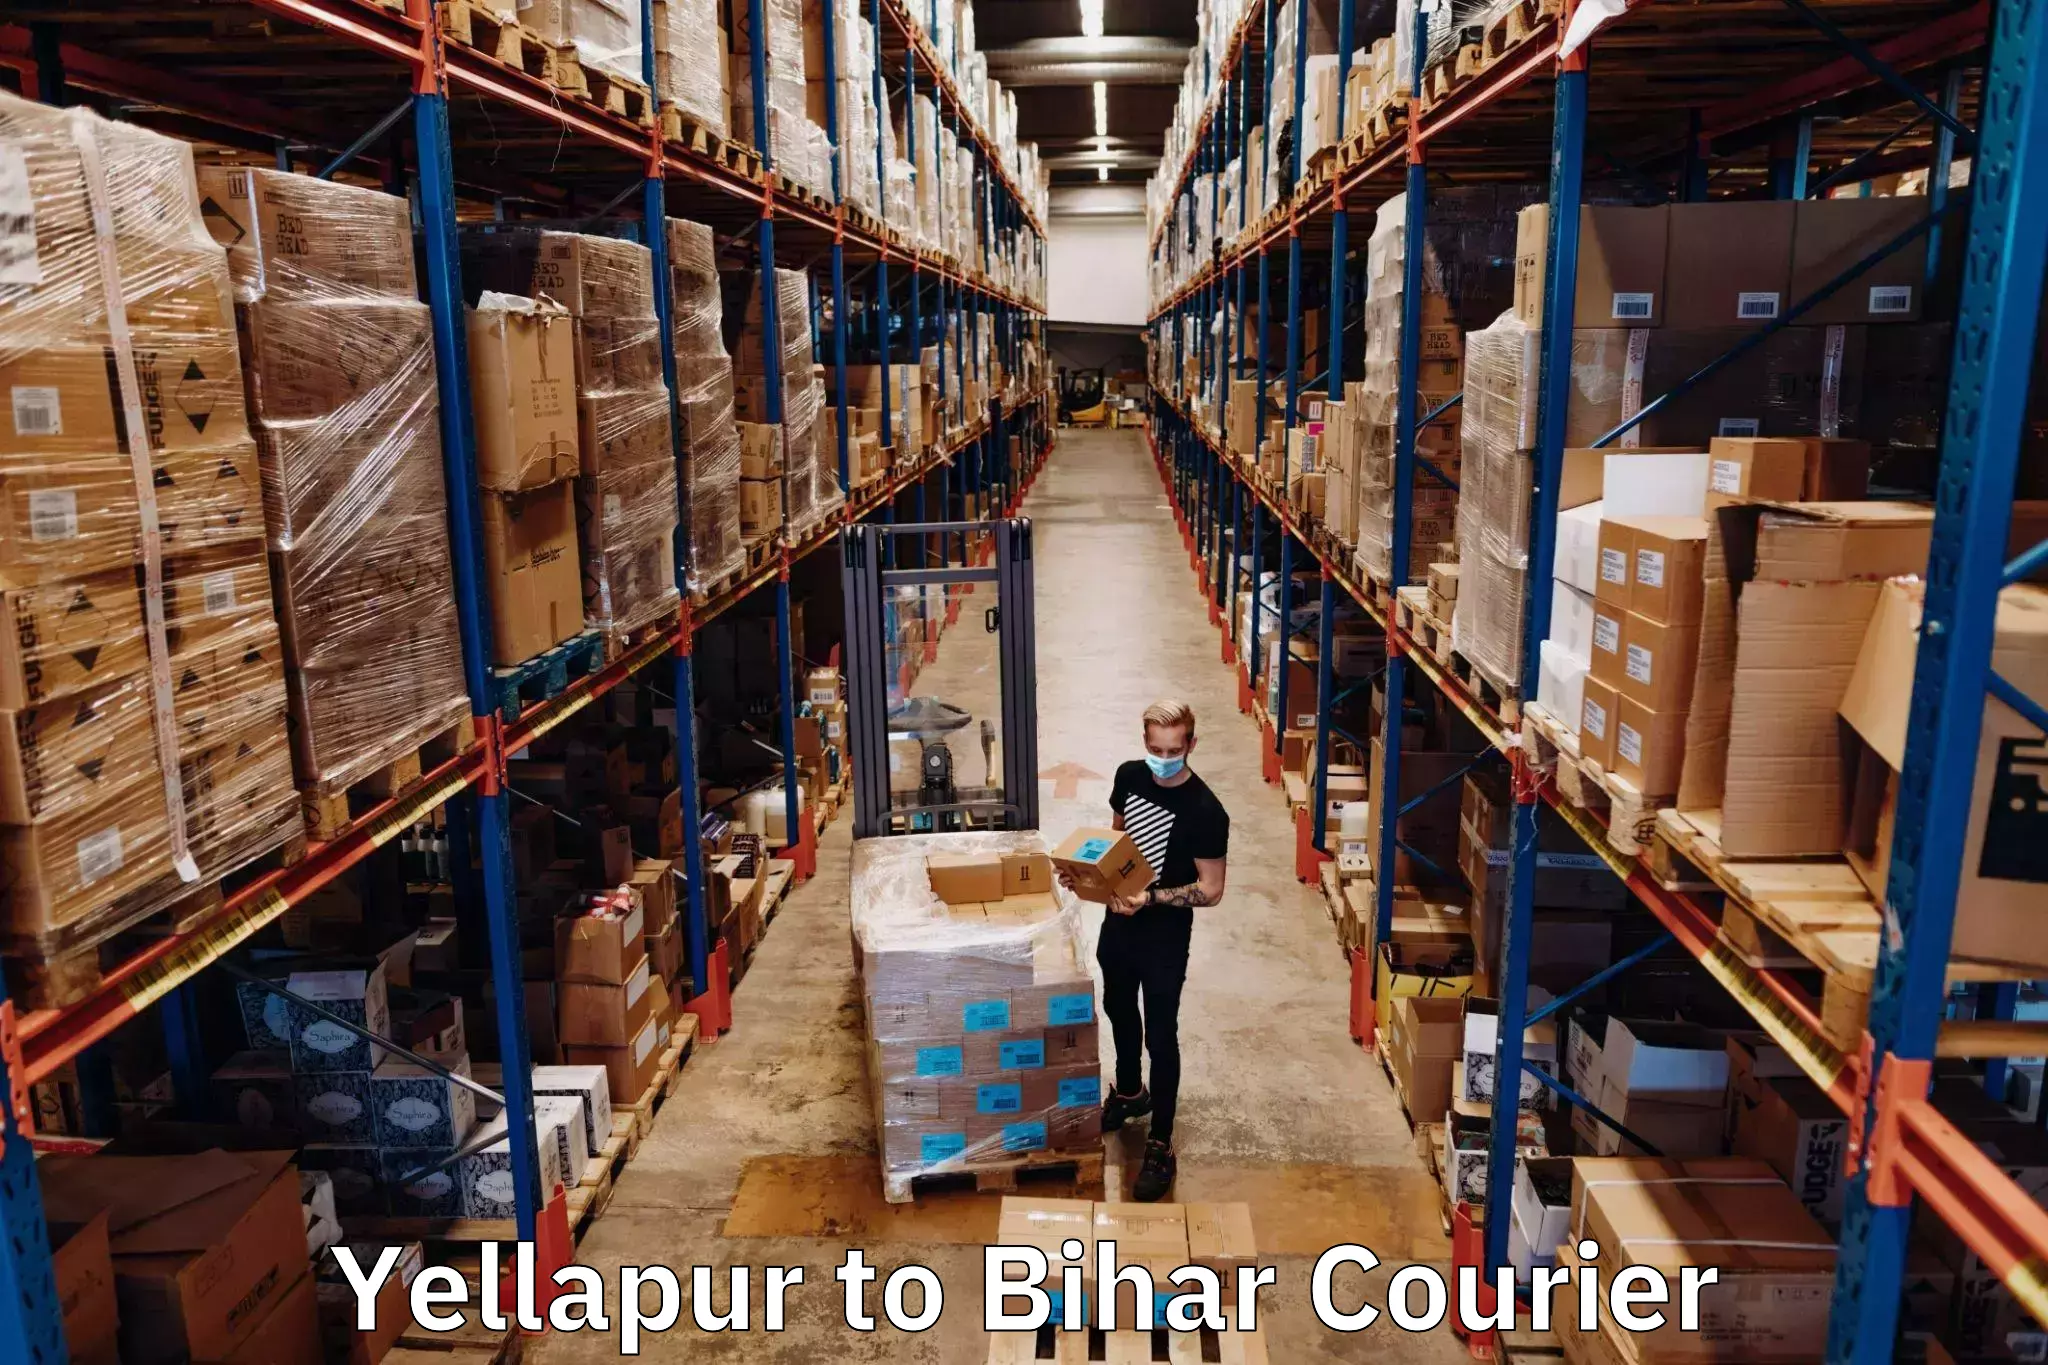 Residential courier service Yellapur to Kumarkhand